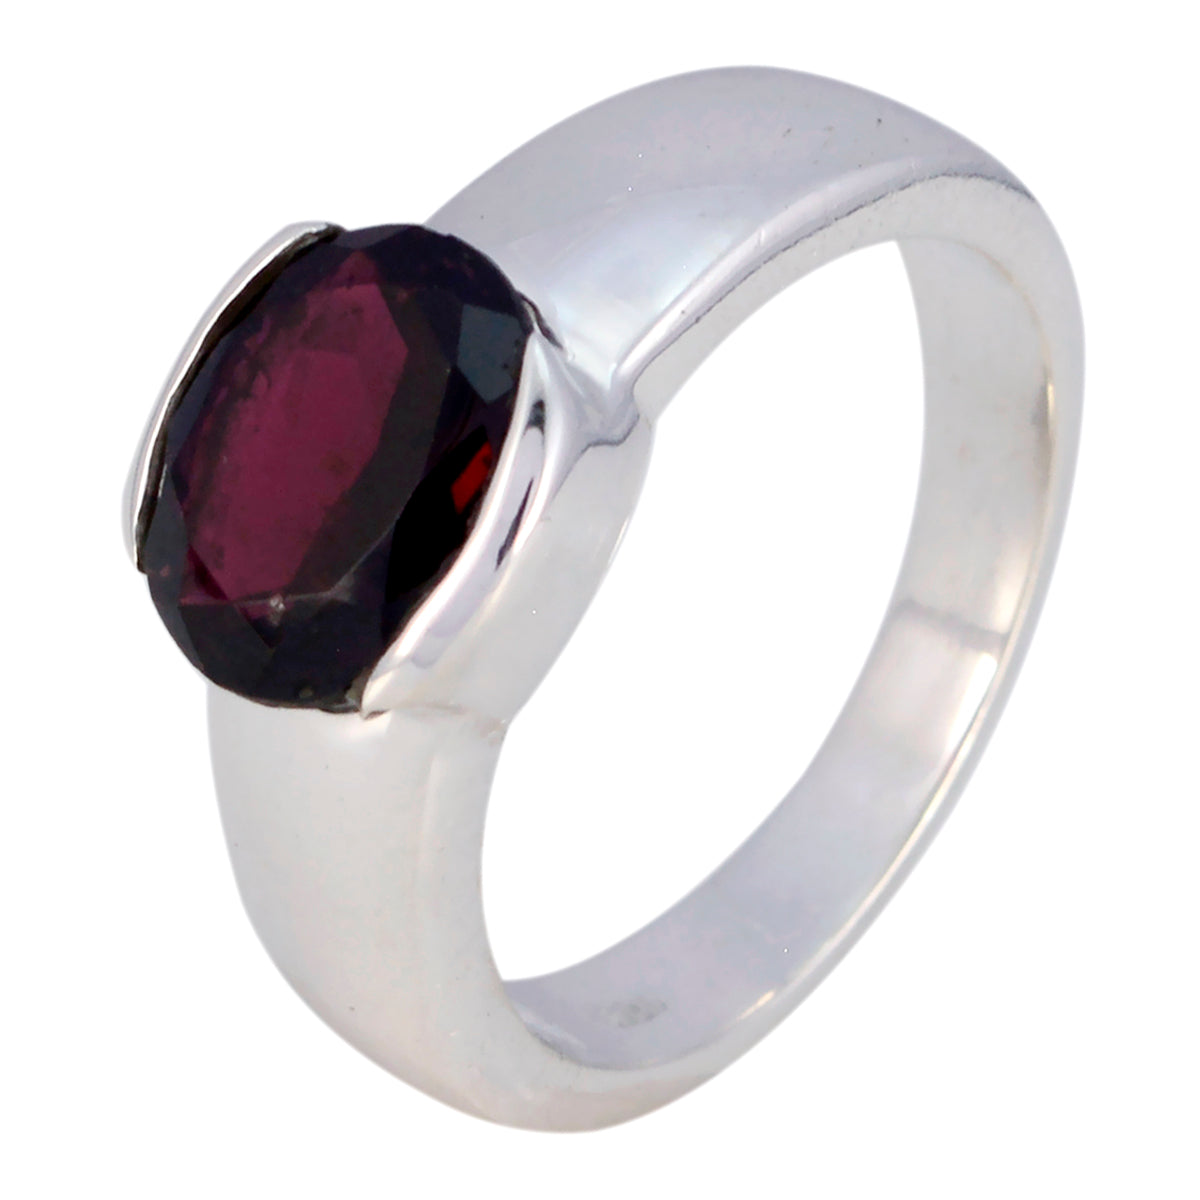 Comely Gemstones Garnet 925 Sterling Silver Ring Beach Glass Jewelry